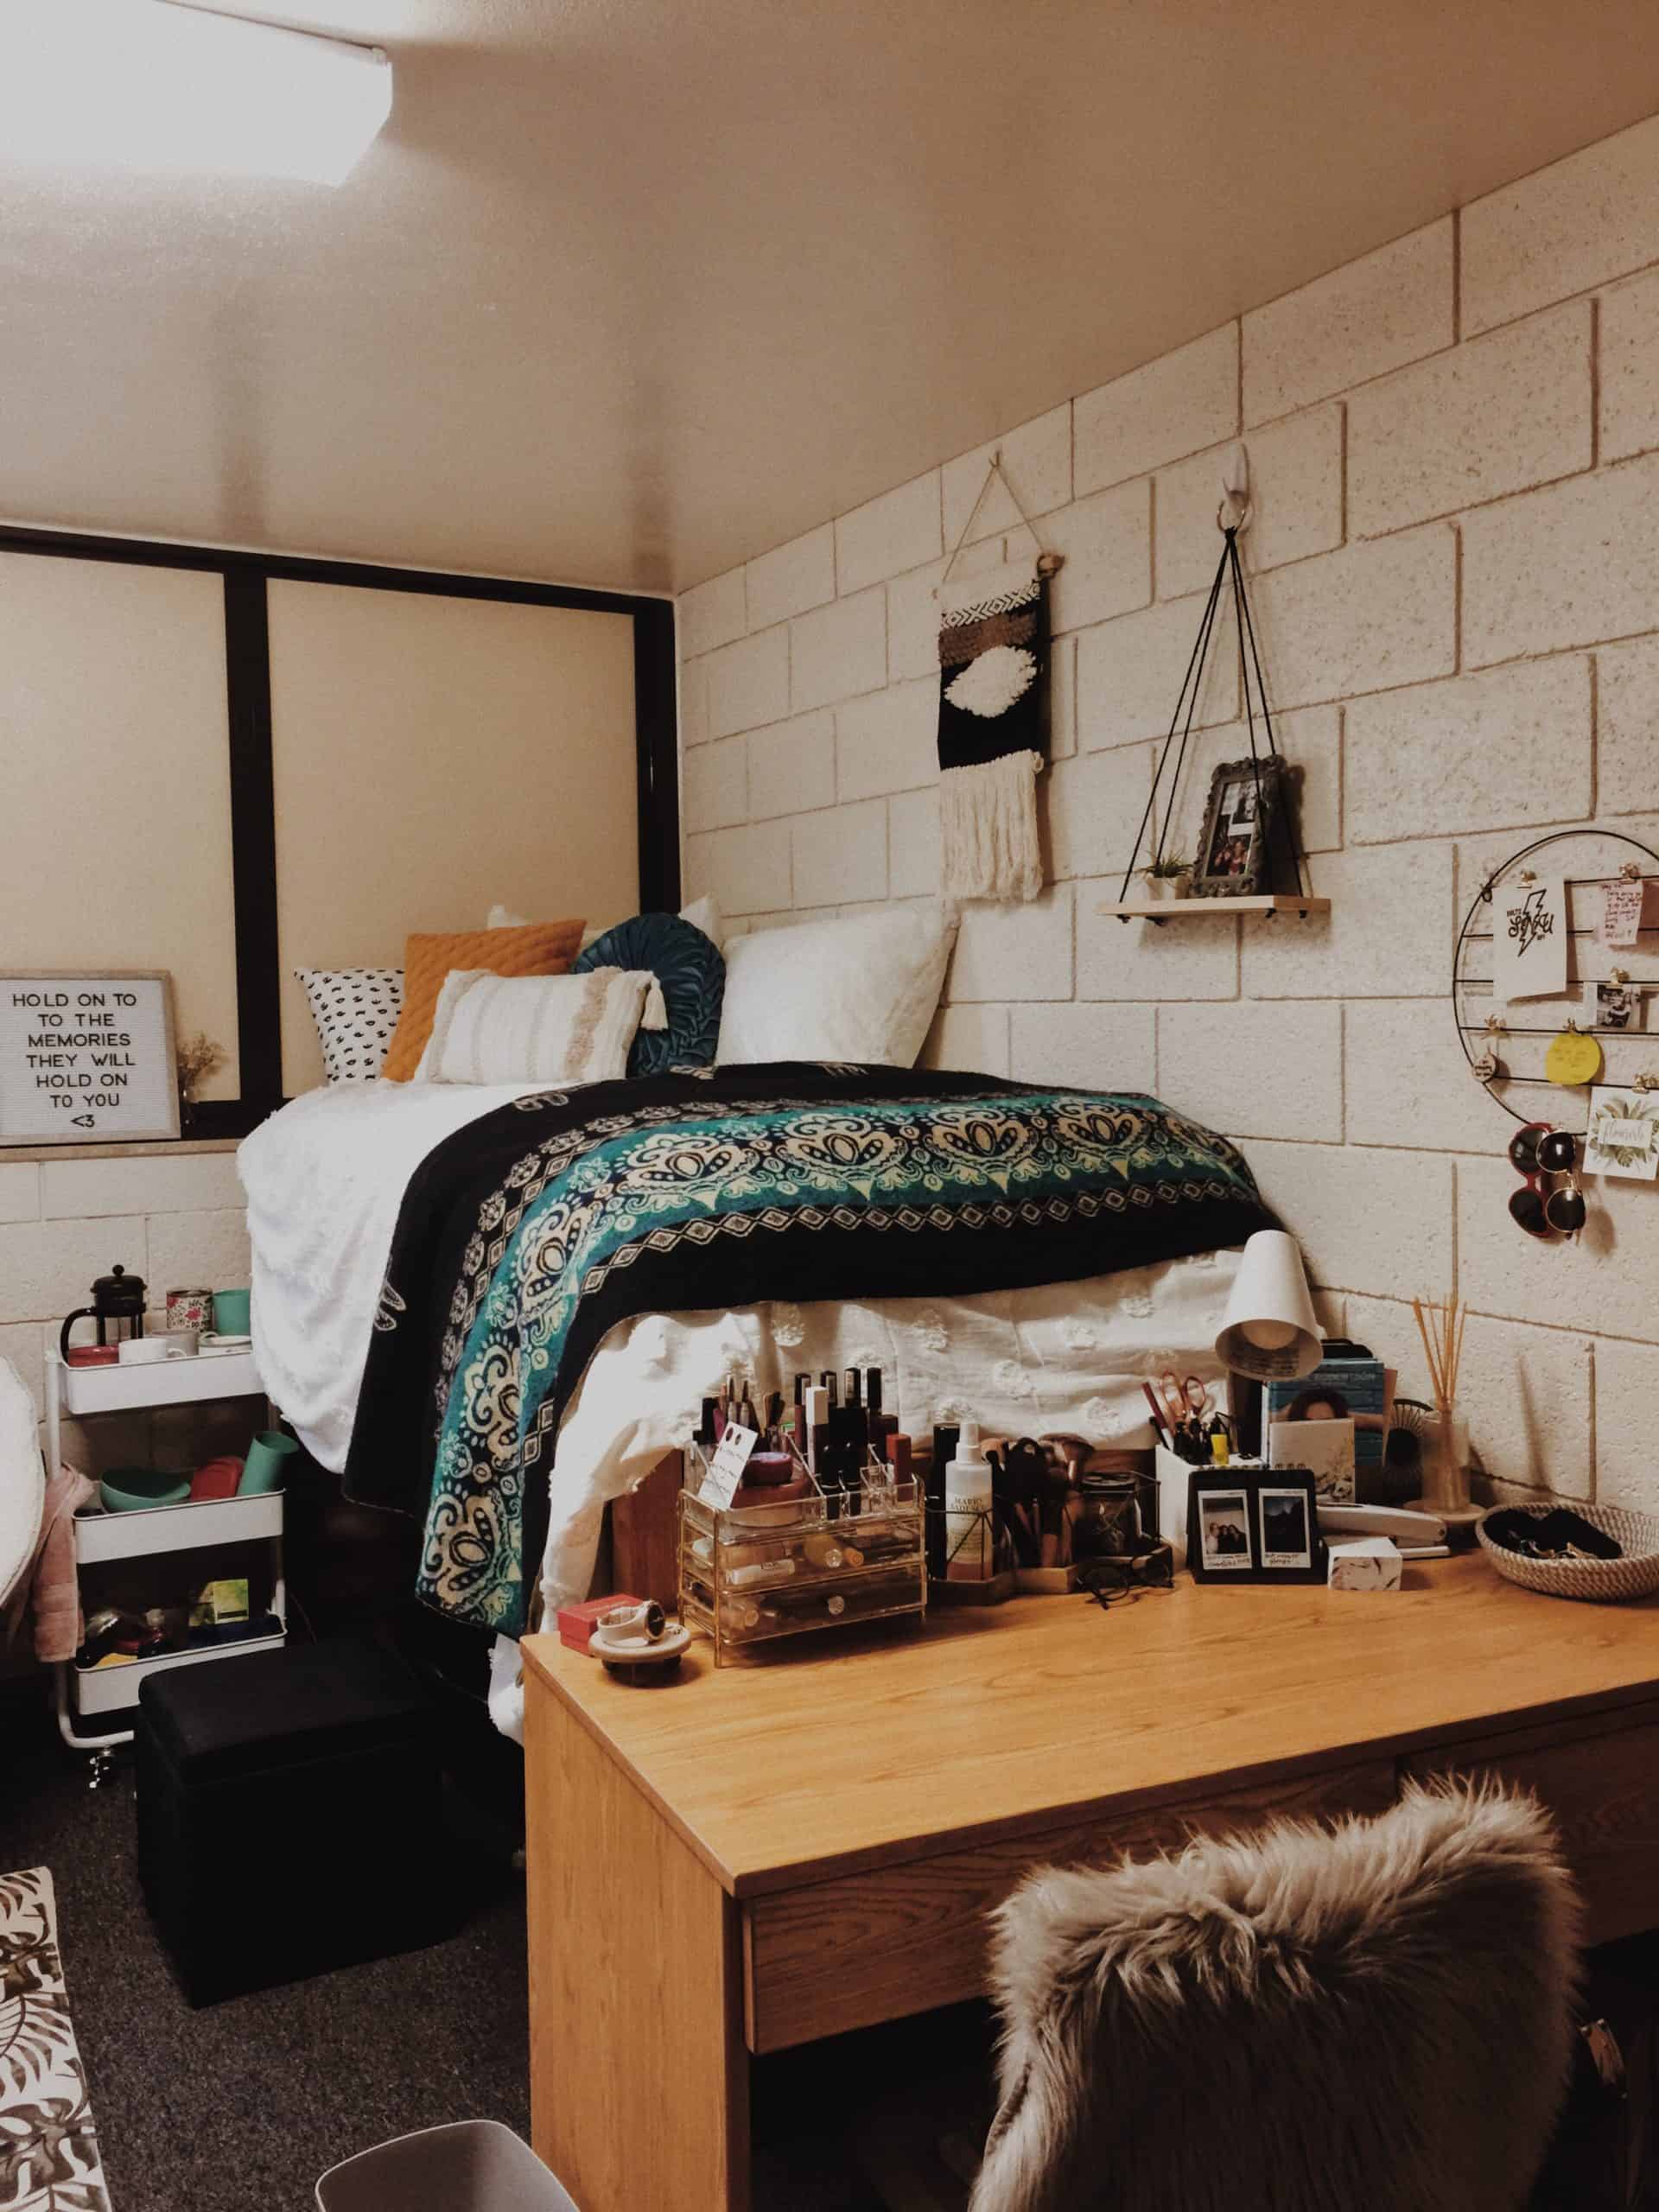 21 Stupid Easy Dorm Room Ideas For Guys That Make the Room Look Amazing -  Simply Life By Bri